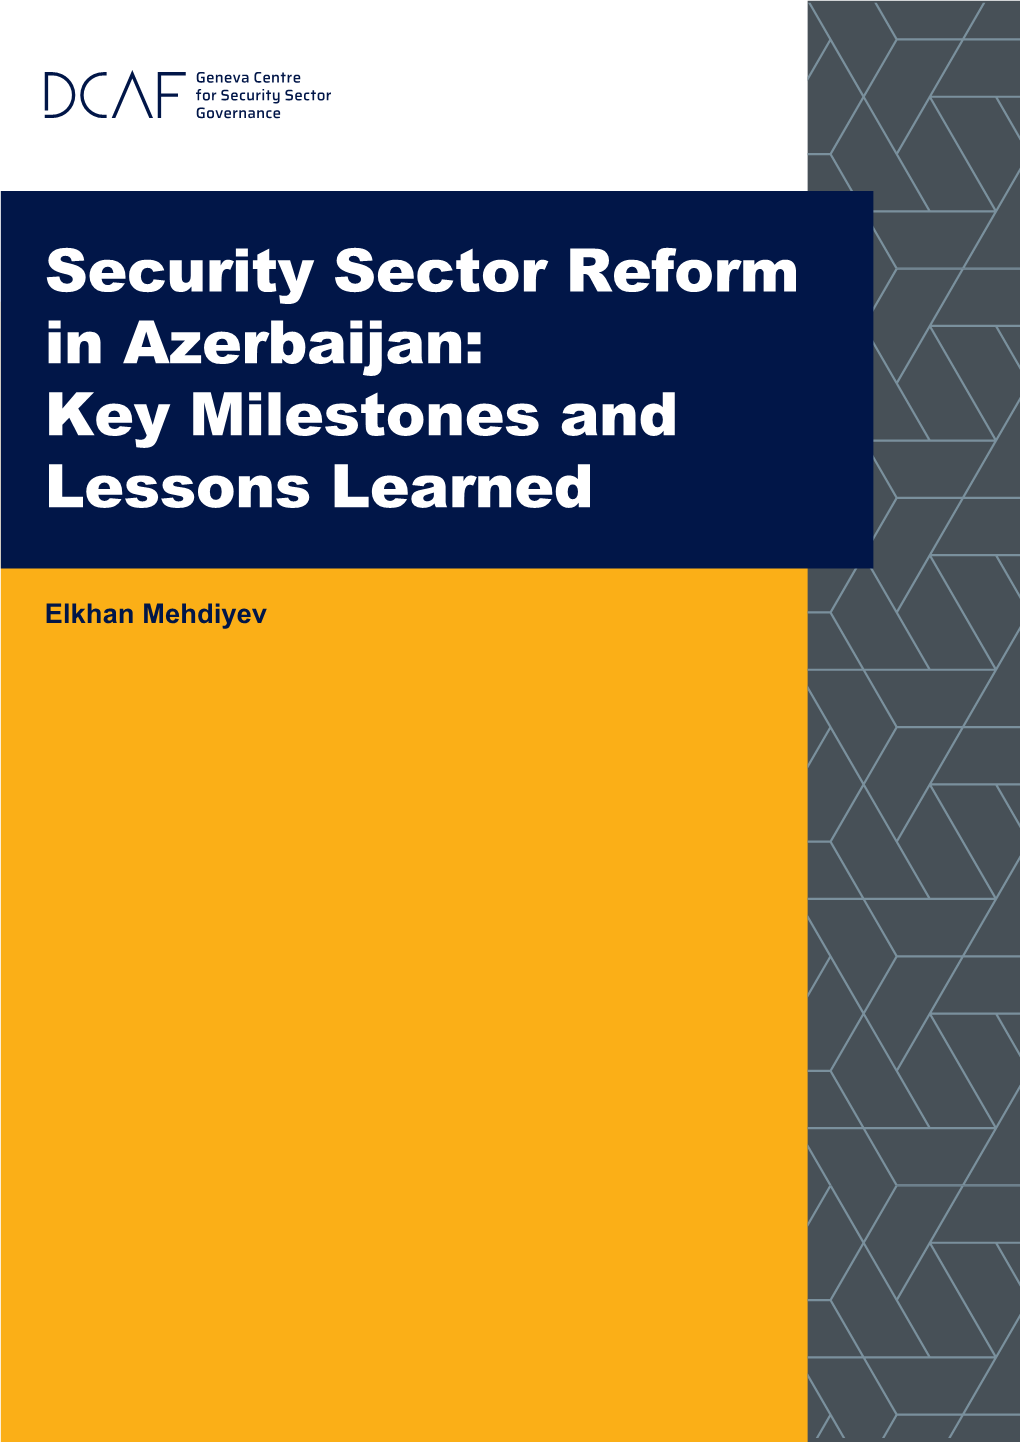 Security Sector Reform in Azerbaijan: Key Milestones and Lessons Learned